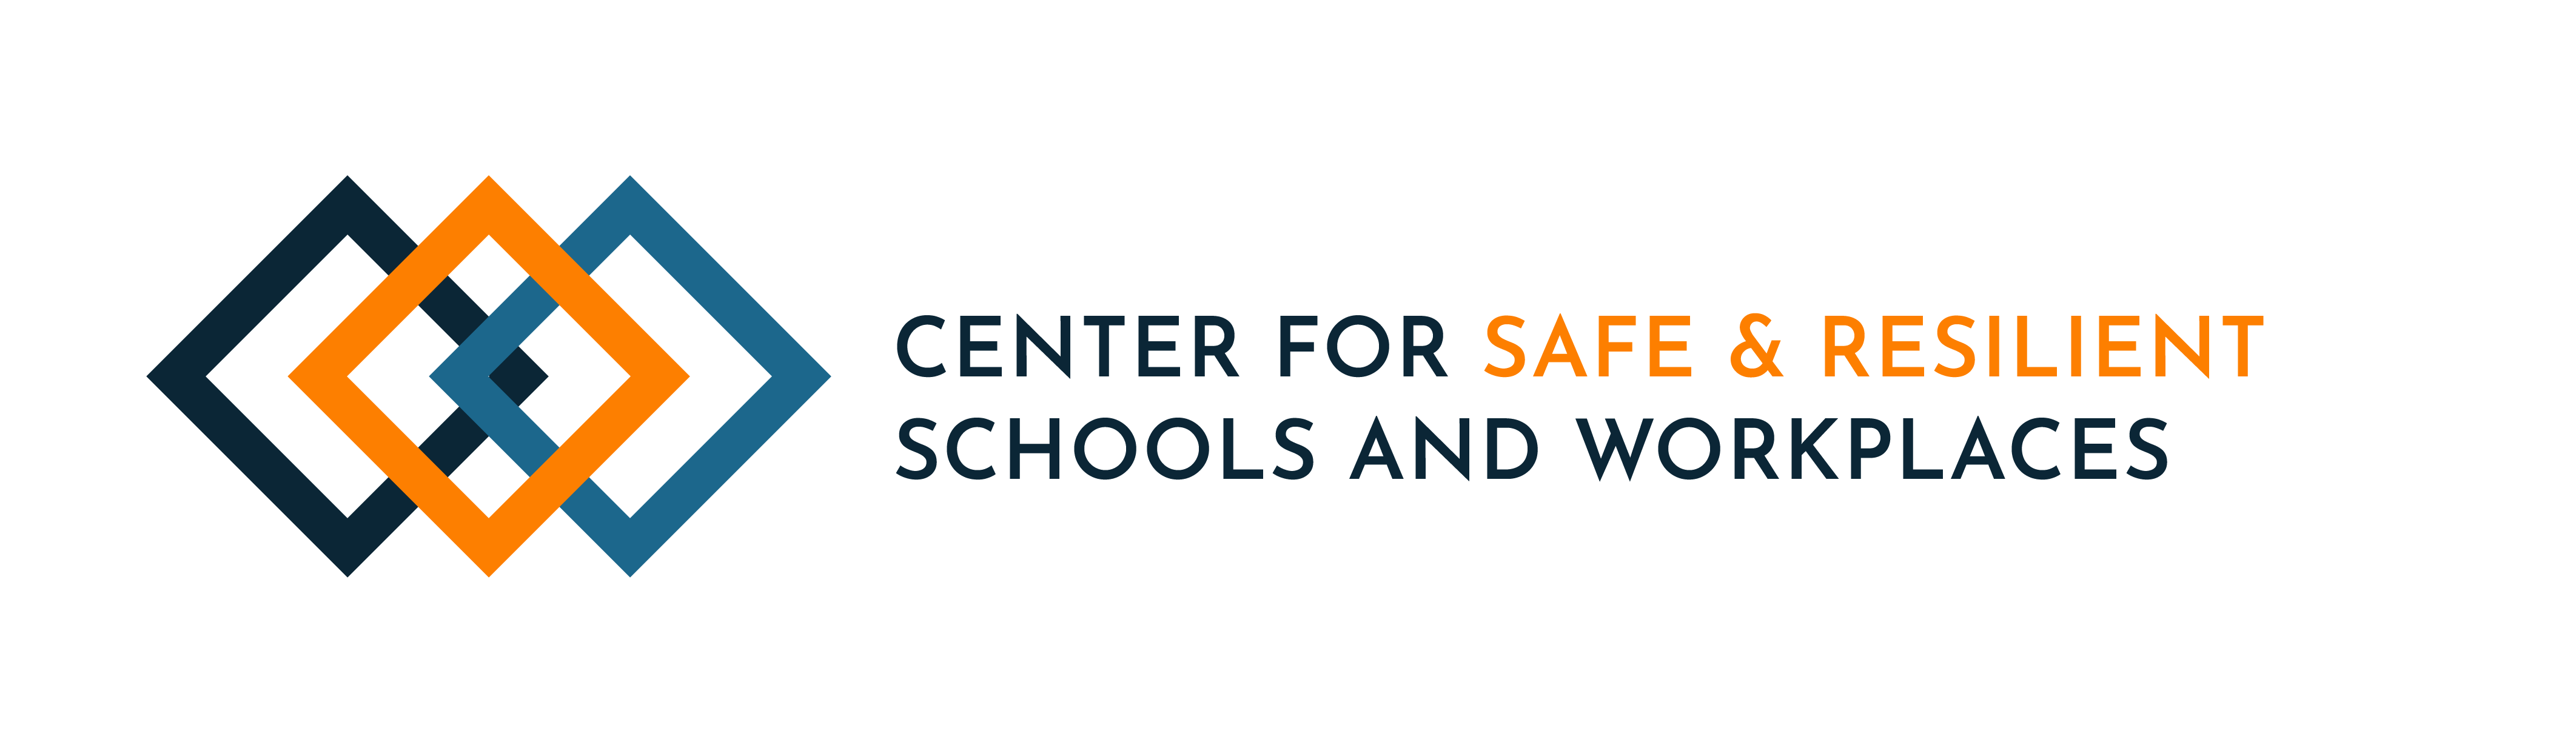 Center for Safe & Resilient Schools and Workplaces